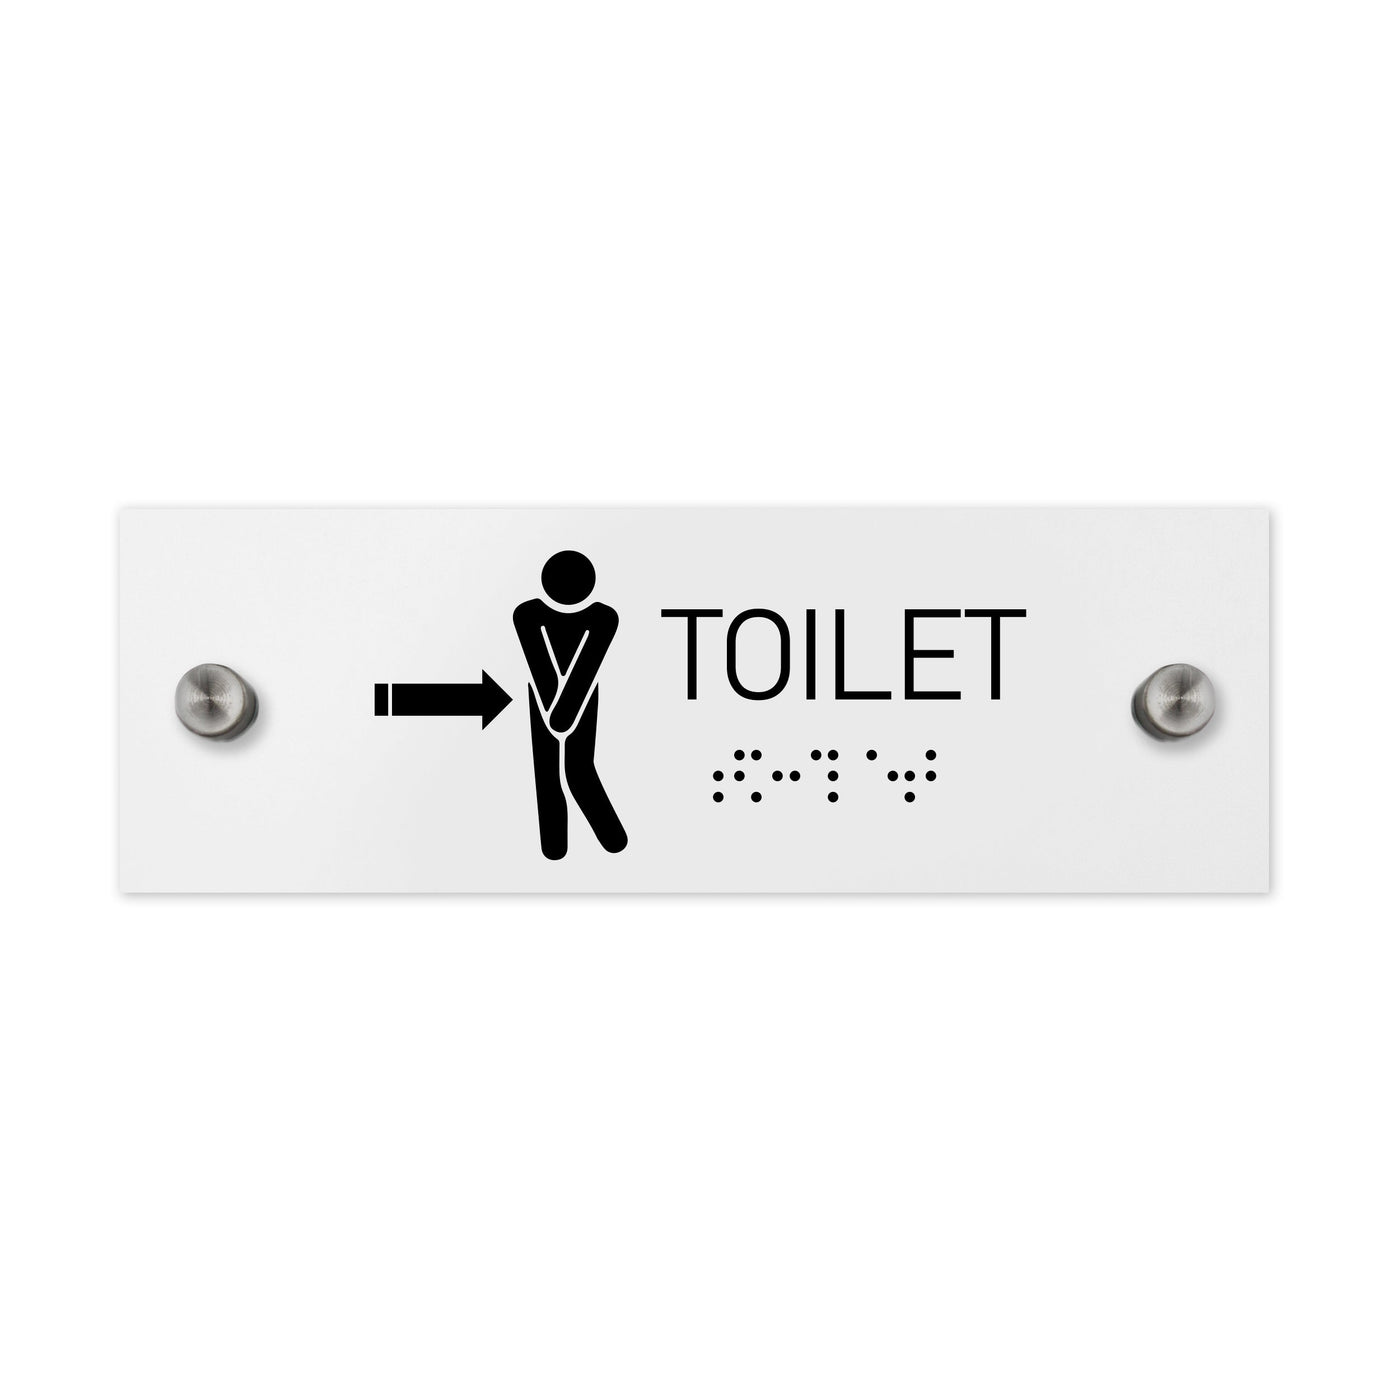 Bathroom Signs - Men Toilet Signs With Braille - Milk Acrylic